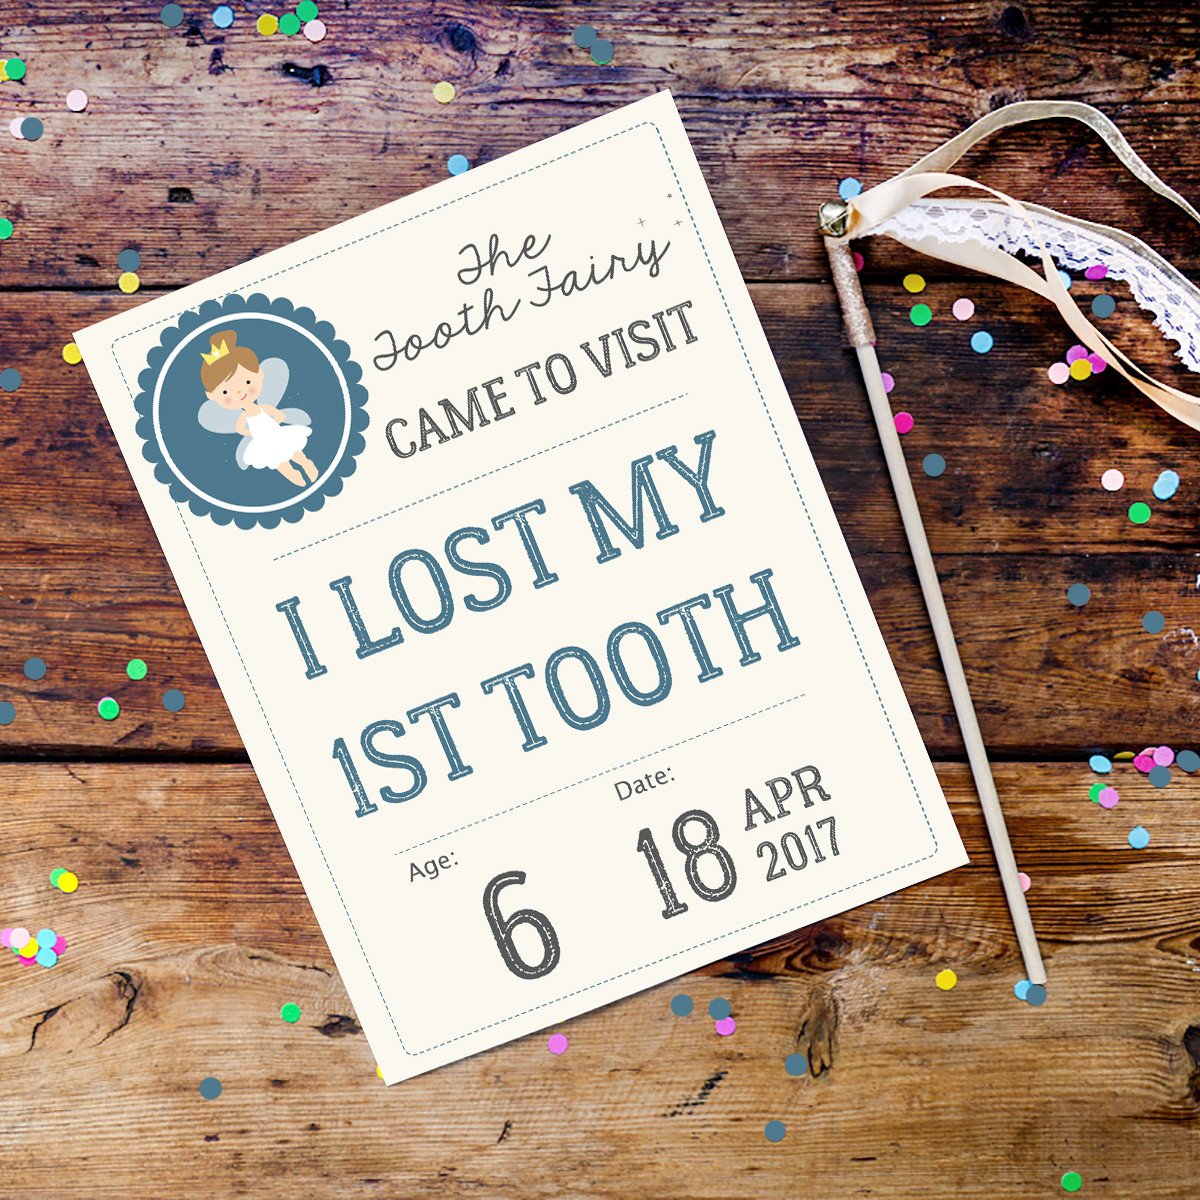 Gorgeous, editable toothfairy certificates and notes.